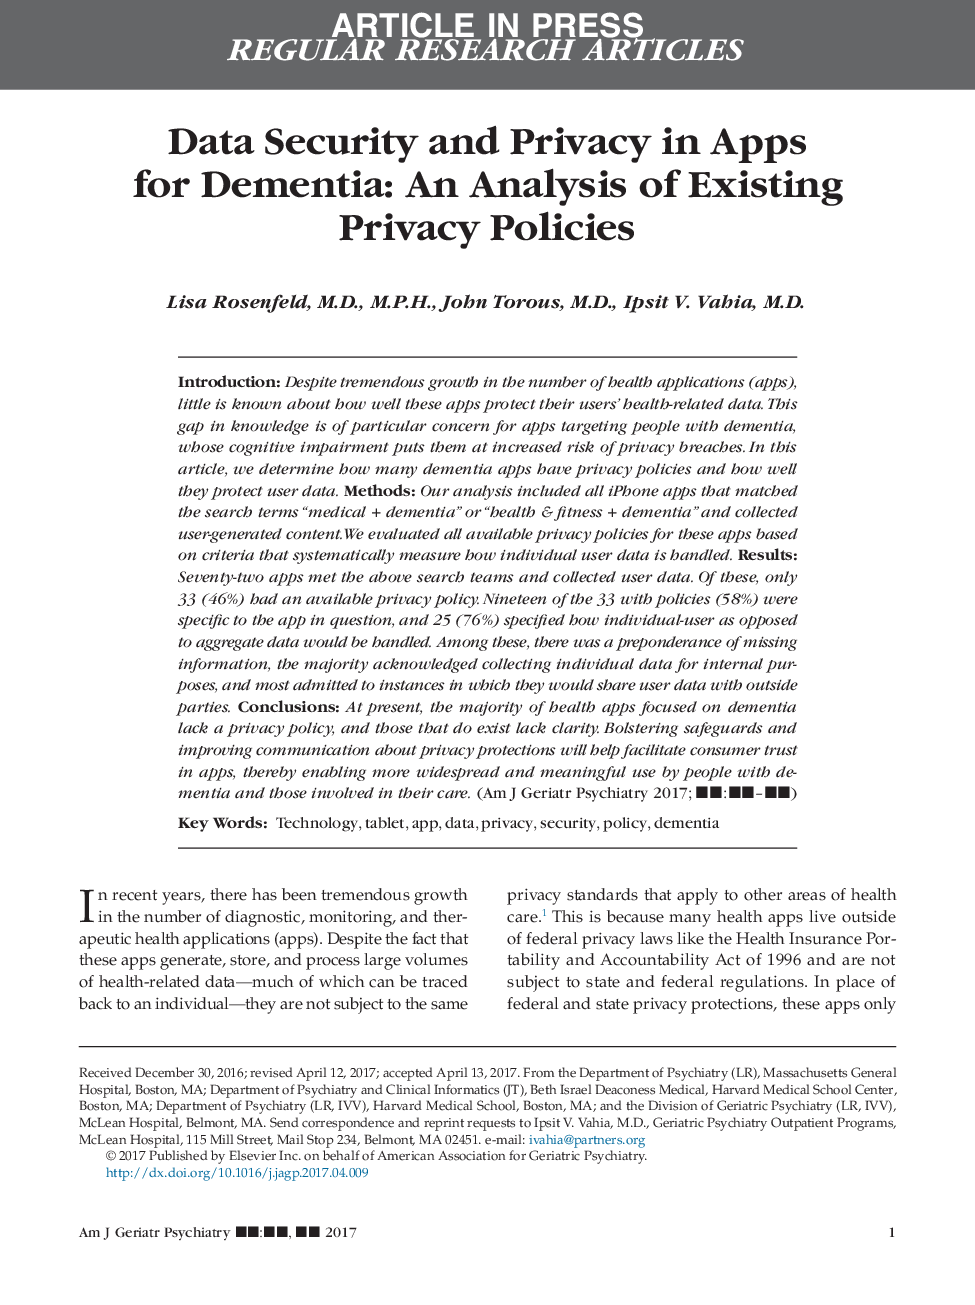 Data Security and Privacy in Apps for Dementia: An Analysis of Existing Privacy Policies